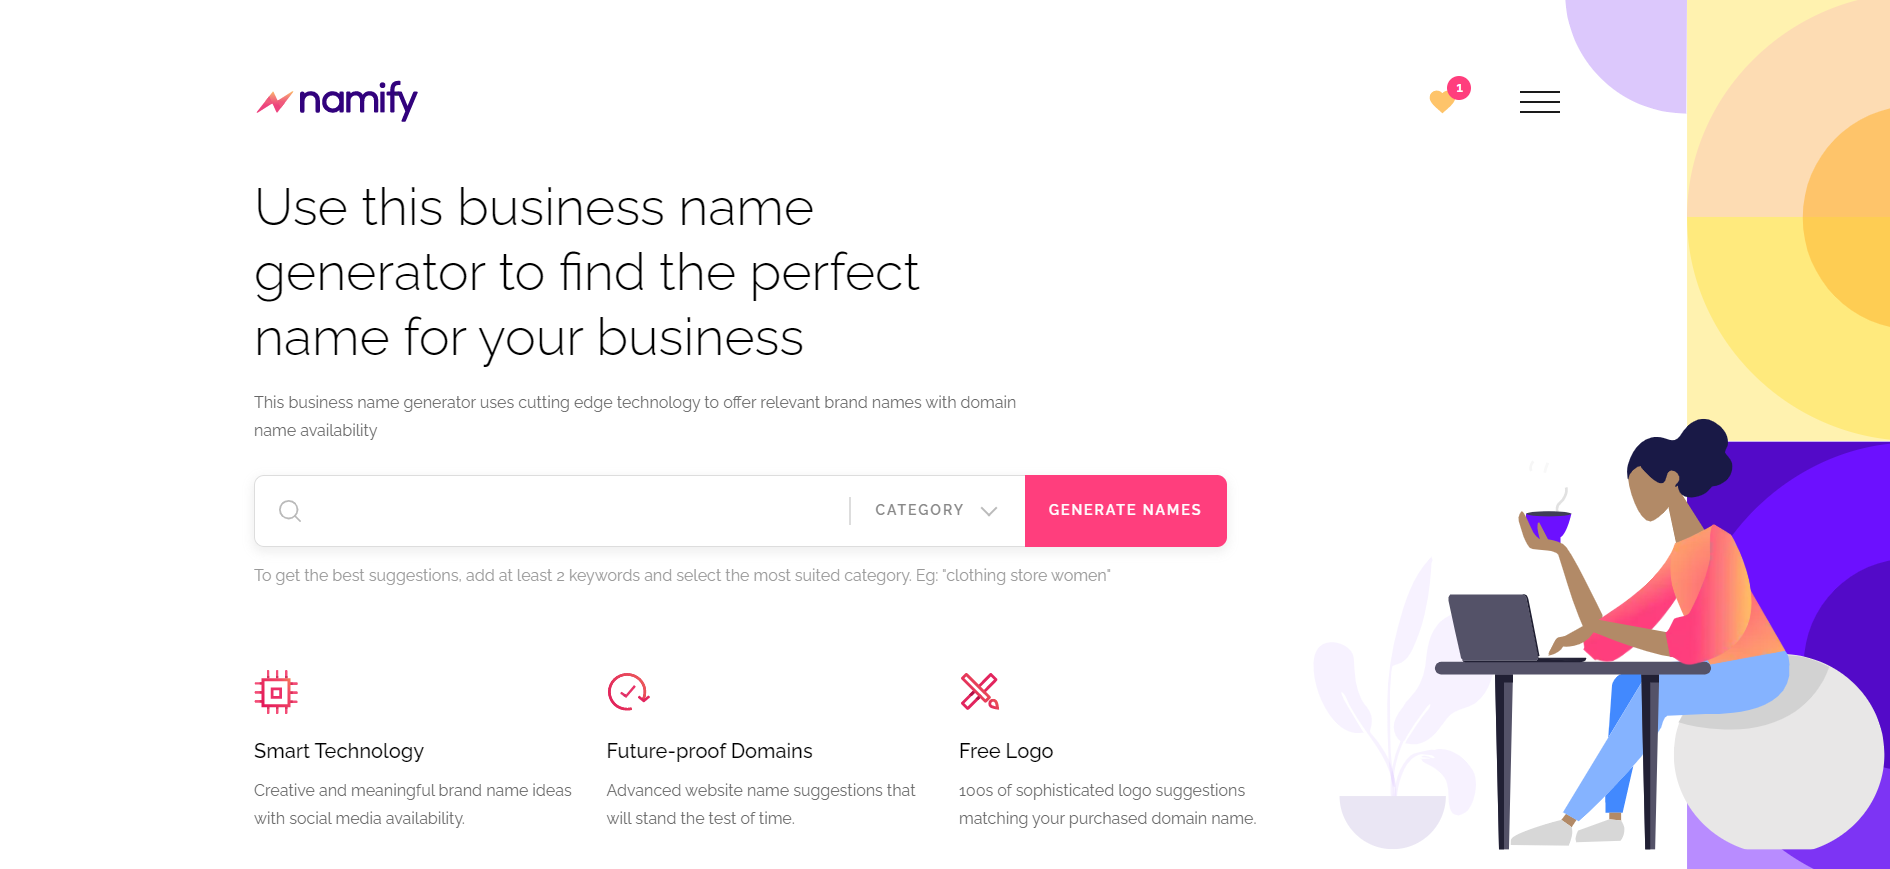 Namify Launches Business Name Generator Tool